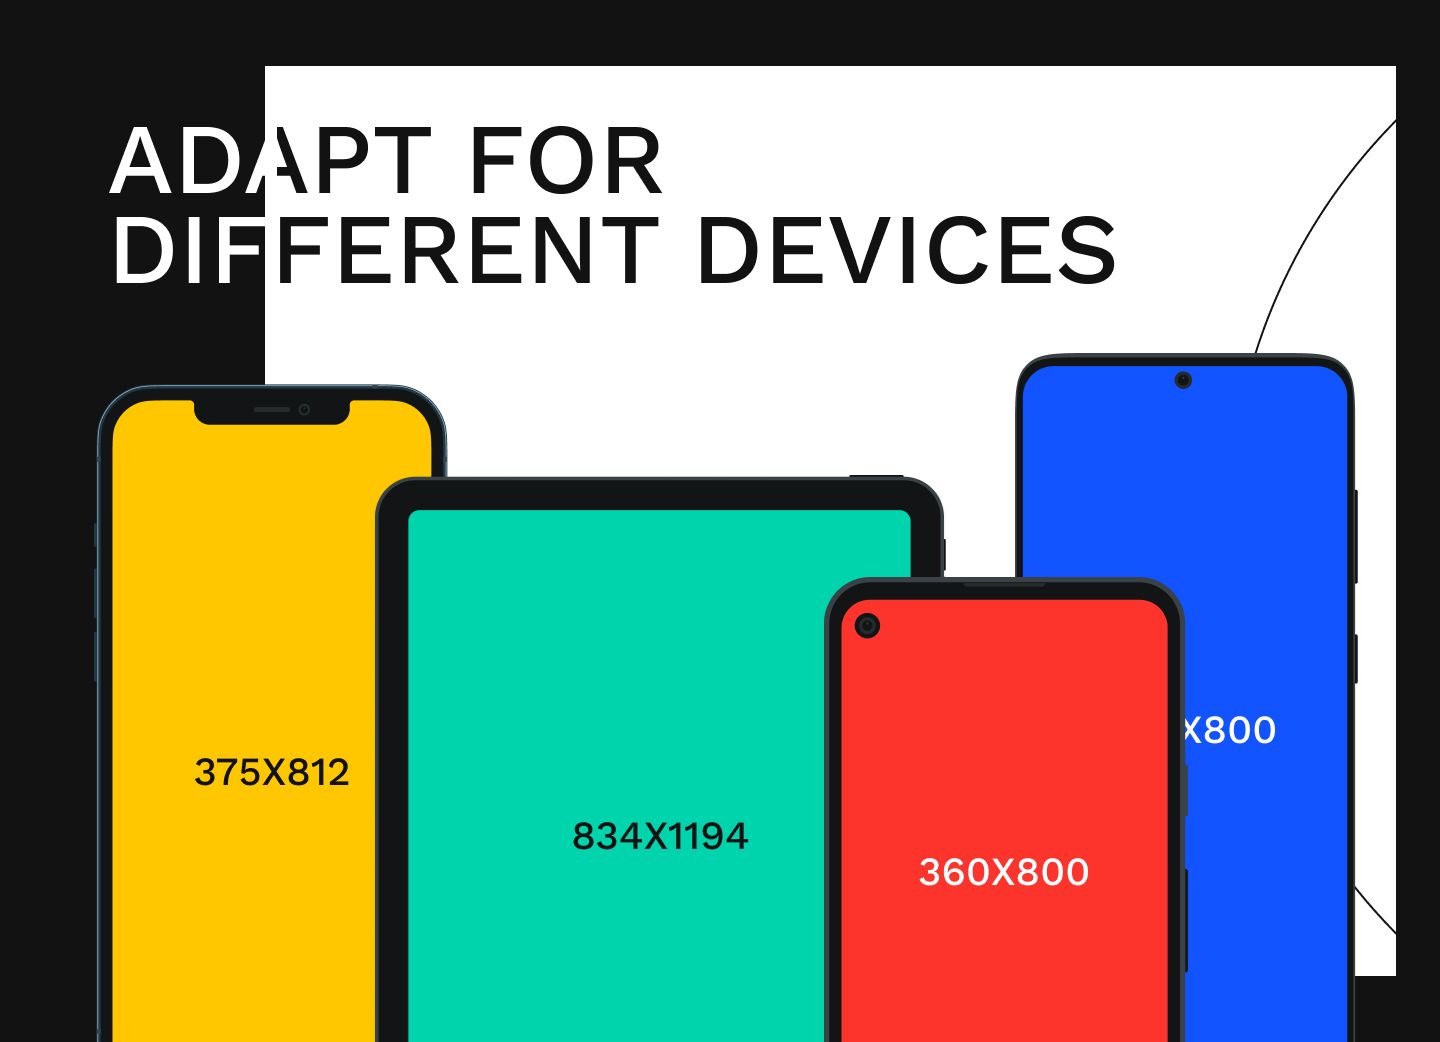 Adapt for different devices